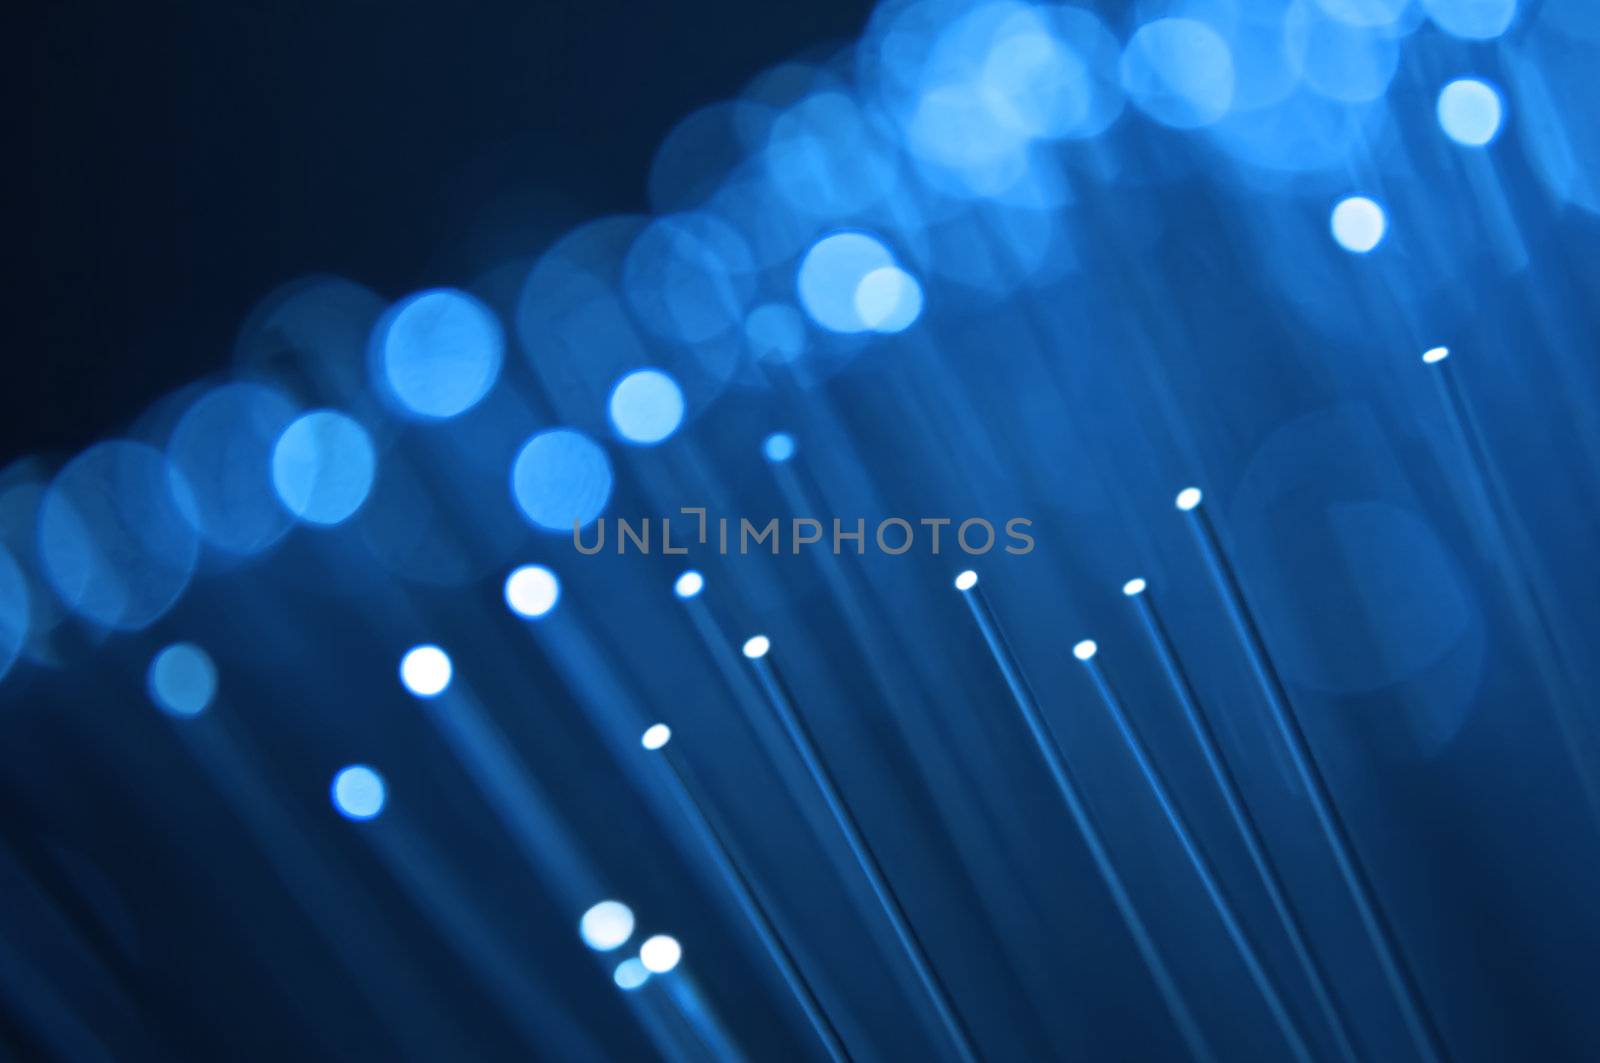 Close up on the ends of many illuminated blue fiber optic strands with black background. Focus on foreground.